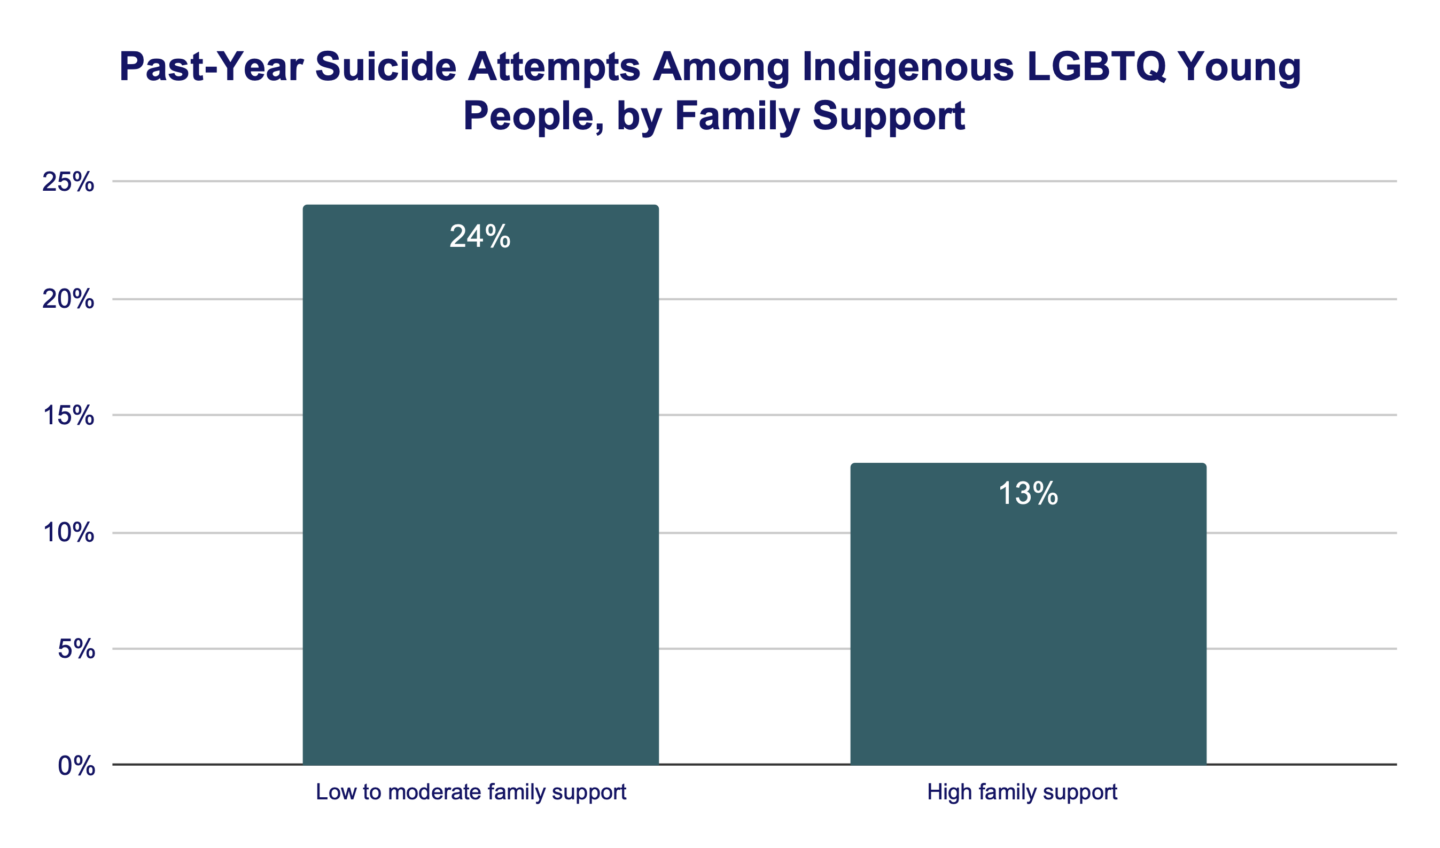 Past-Year Suicide Attempts Among Indigenous LGBTQ Young People, by Family Support